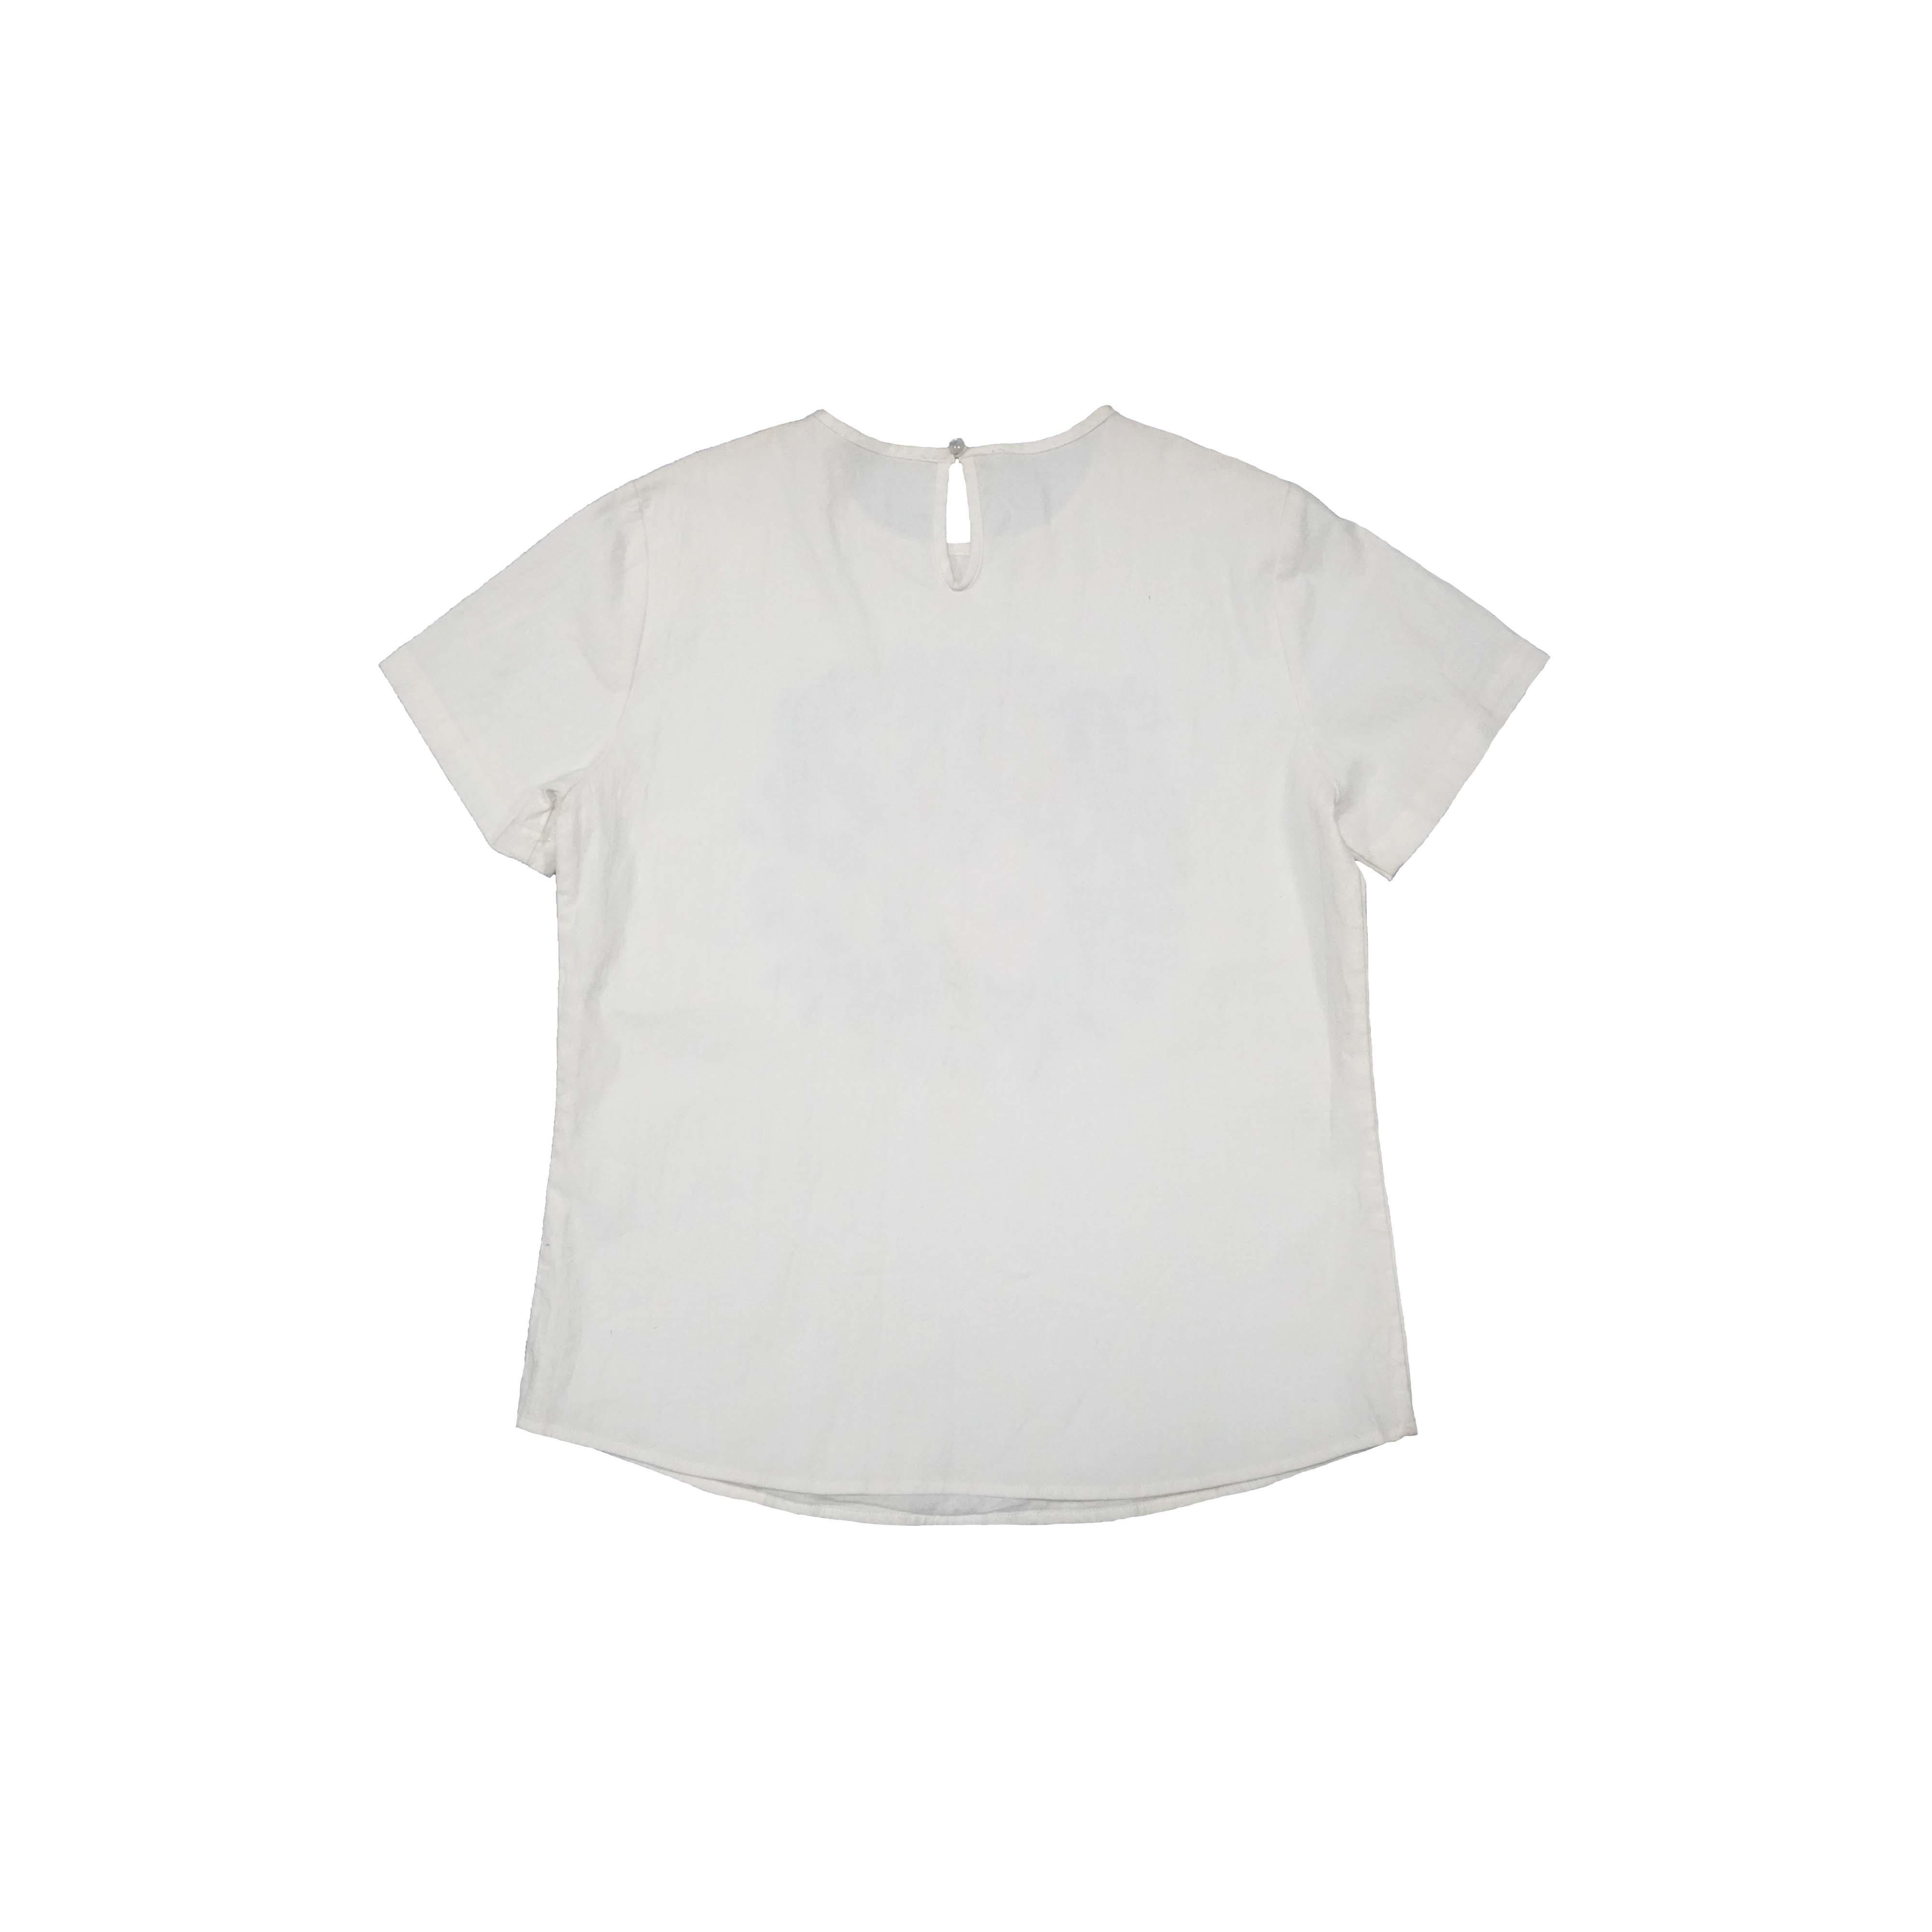 White Embroidered Women's Top